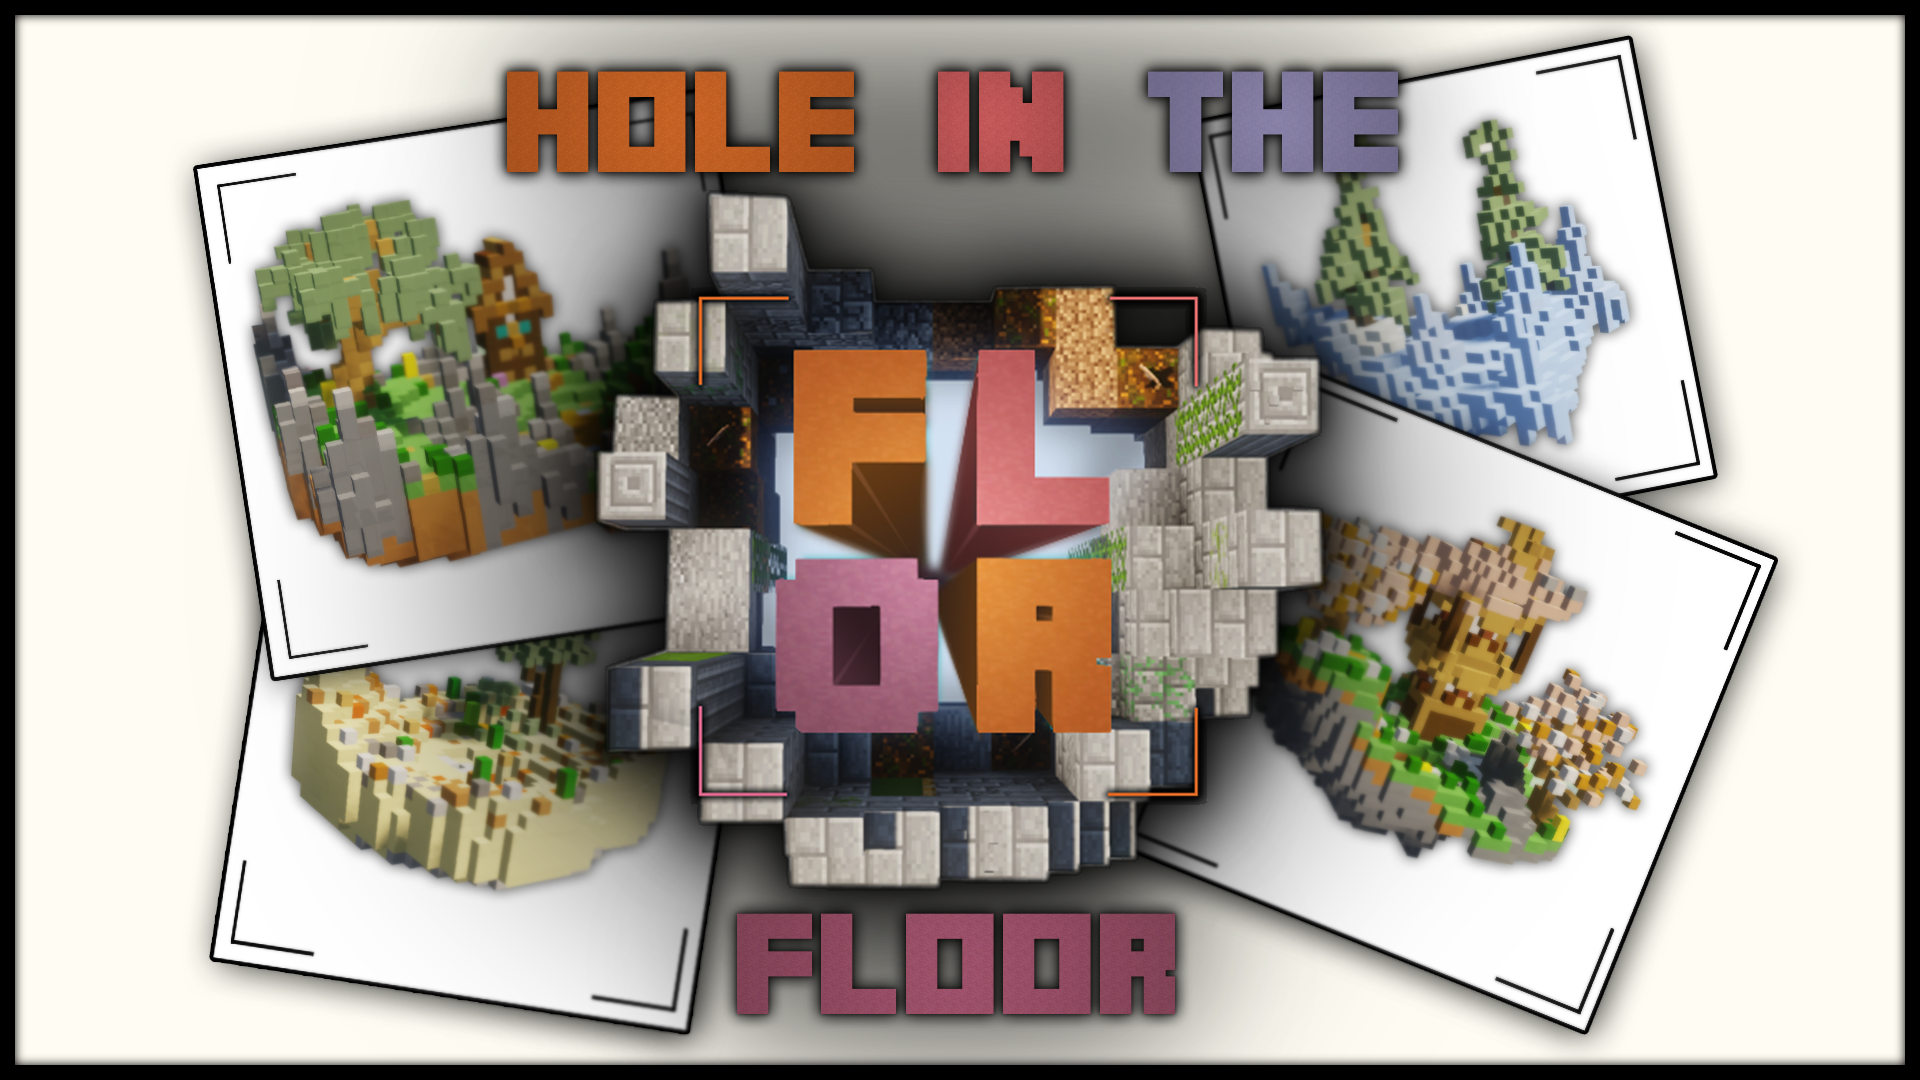 Hole in the Floor